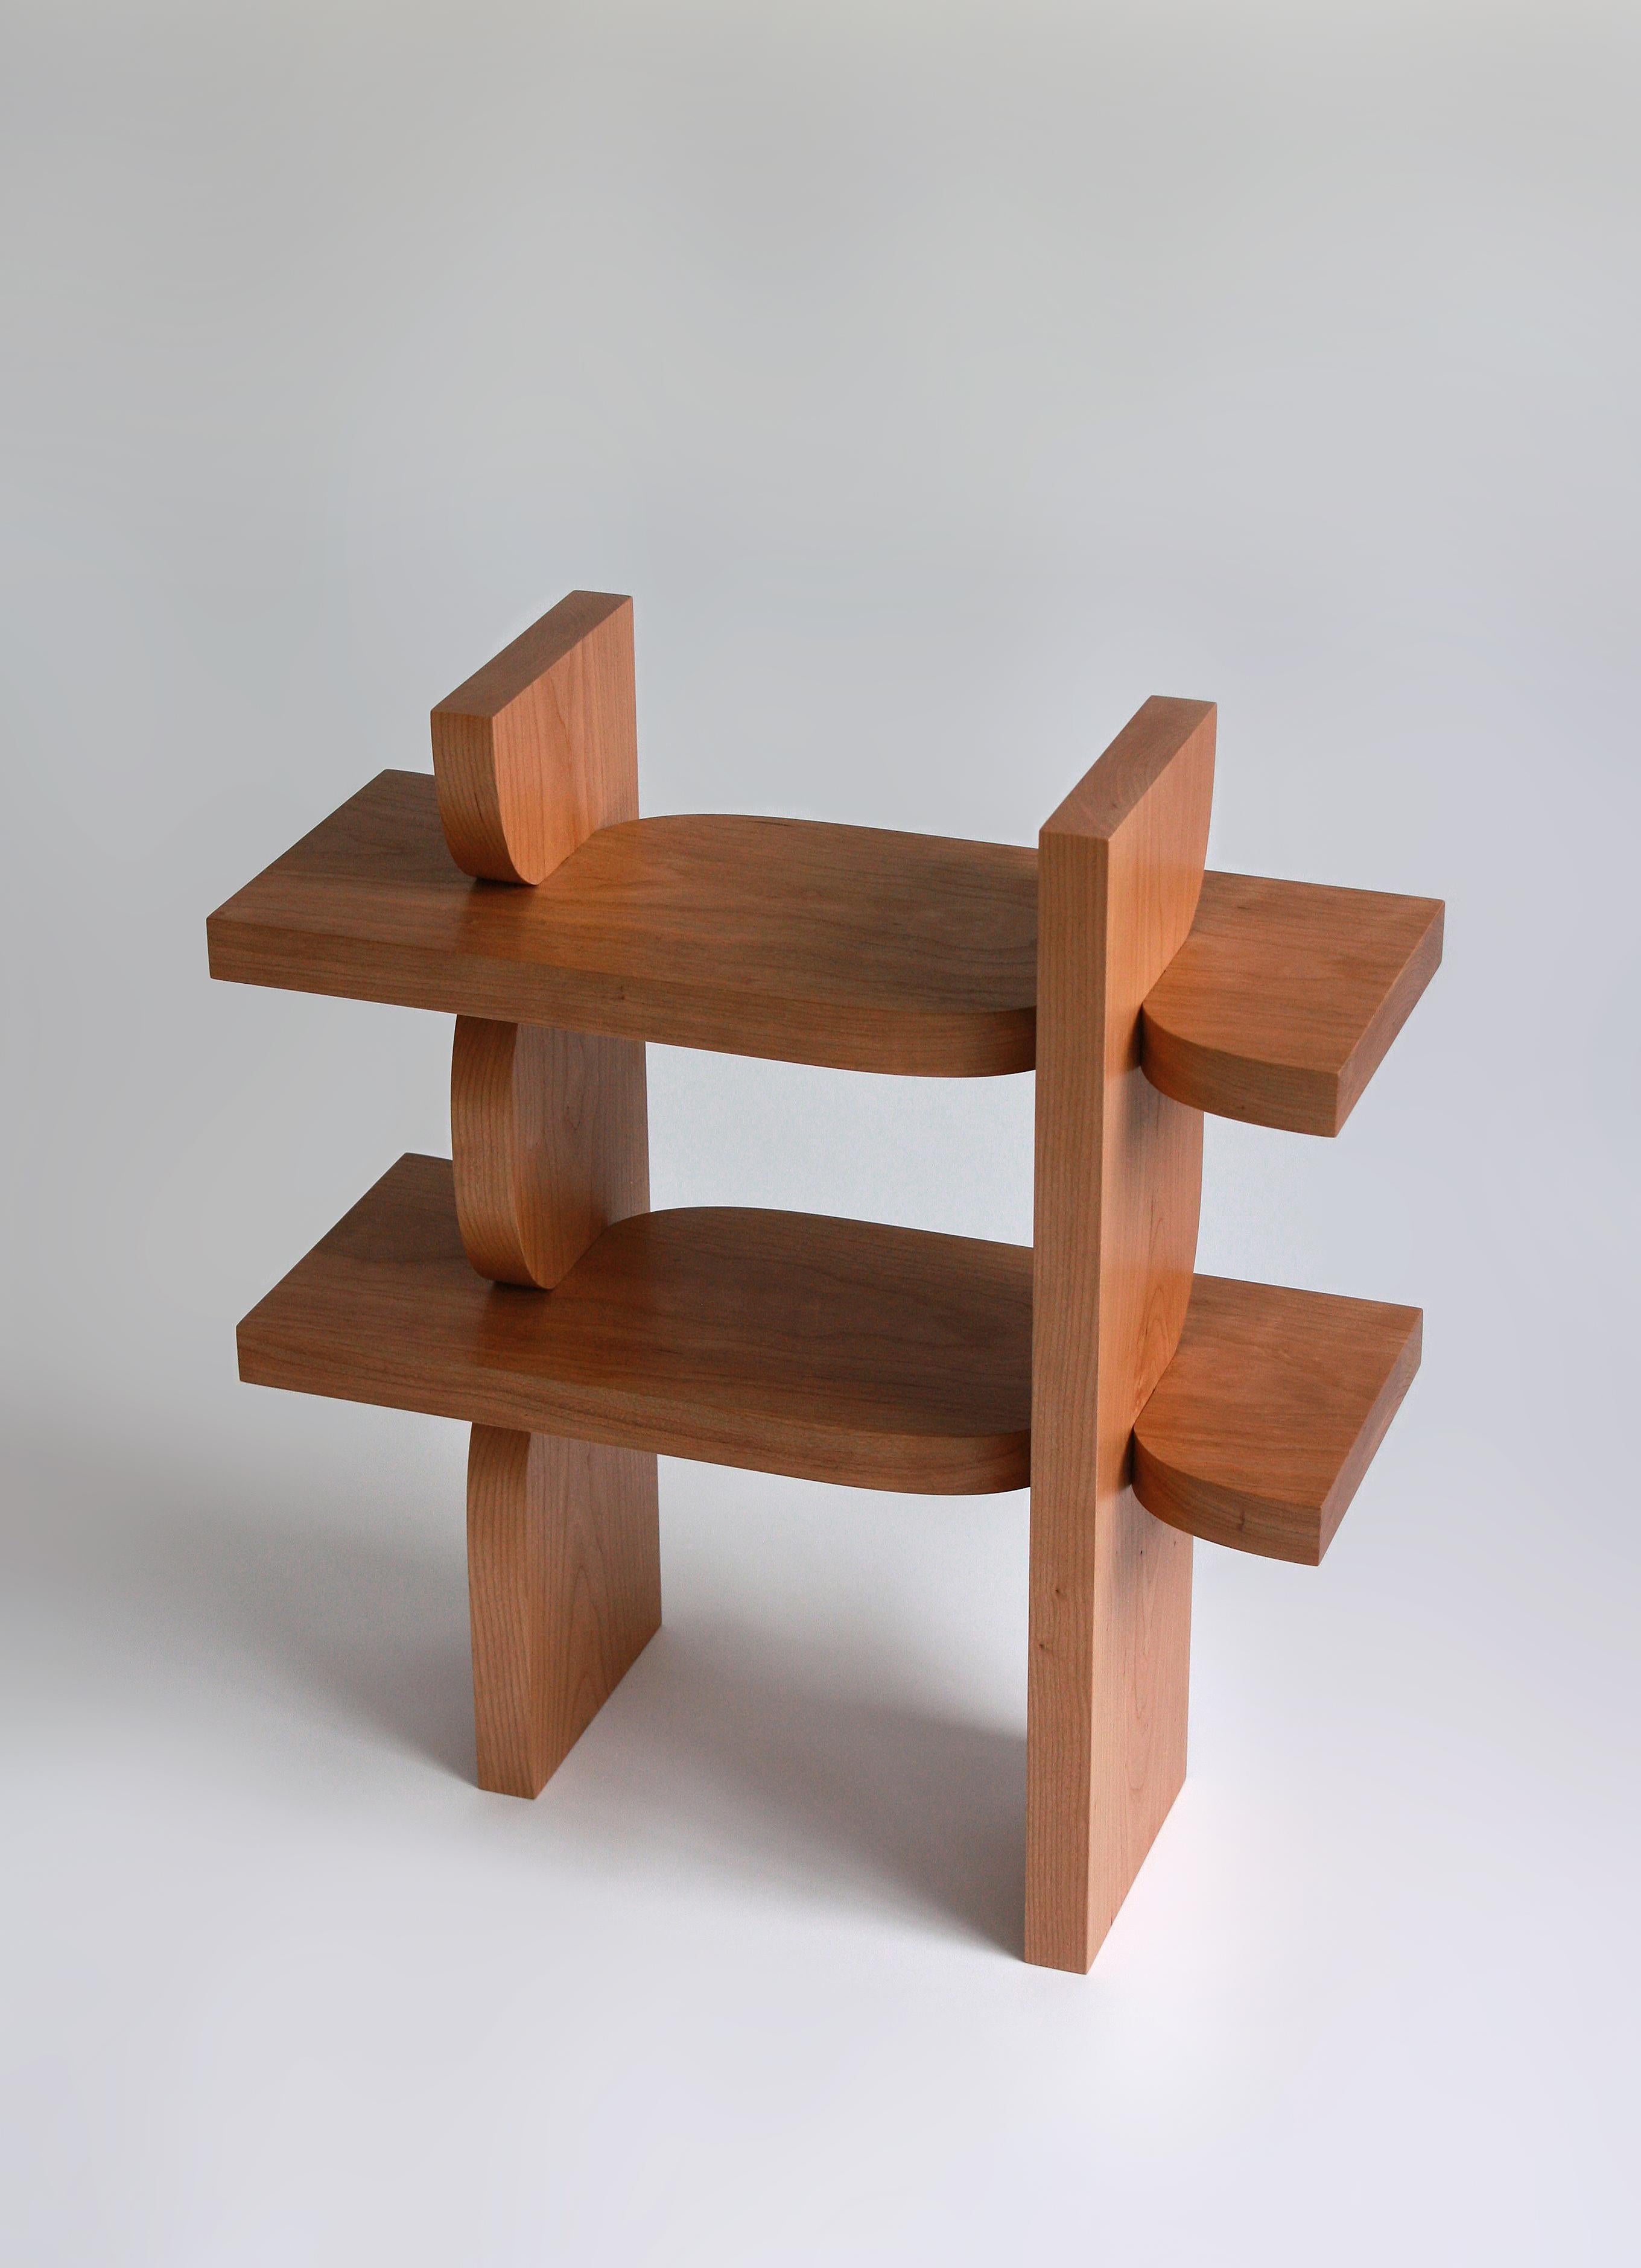 Hand-Crafted Between a Rock and a Hard Place Shelf by from Solid Cherry Wood, Maria Tyakina For Sale